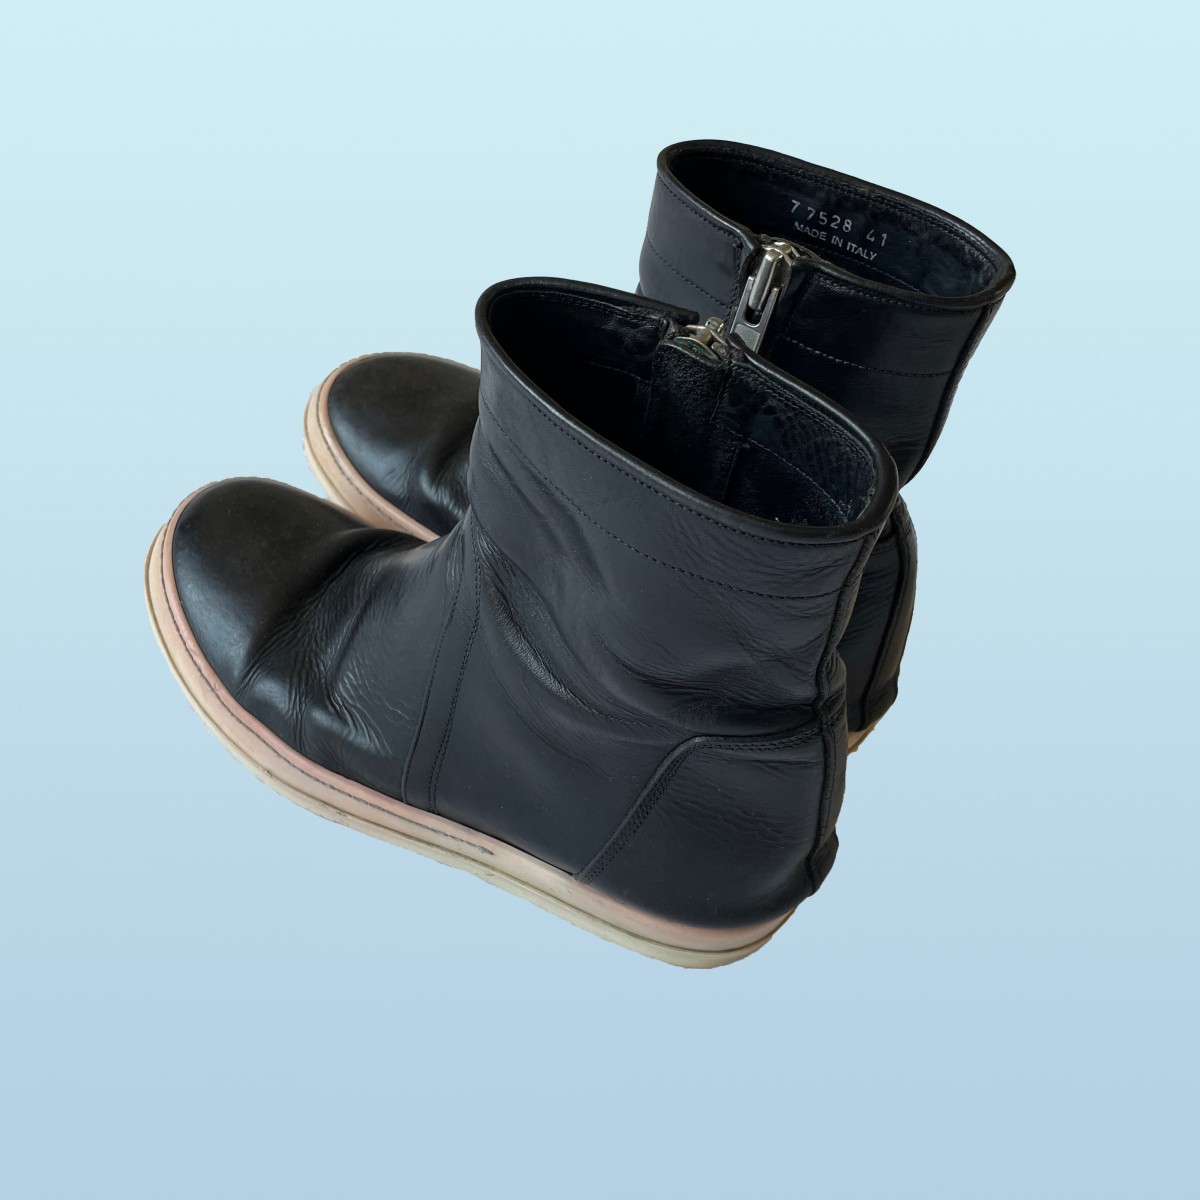 Rick Owens Basket Creeper Ankle Boots